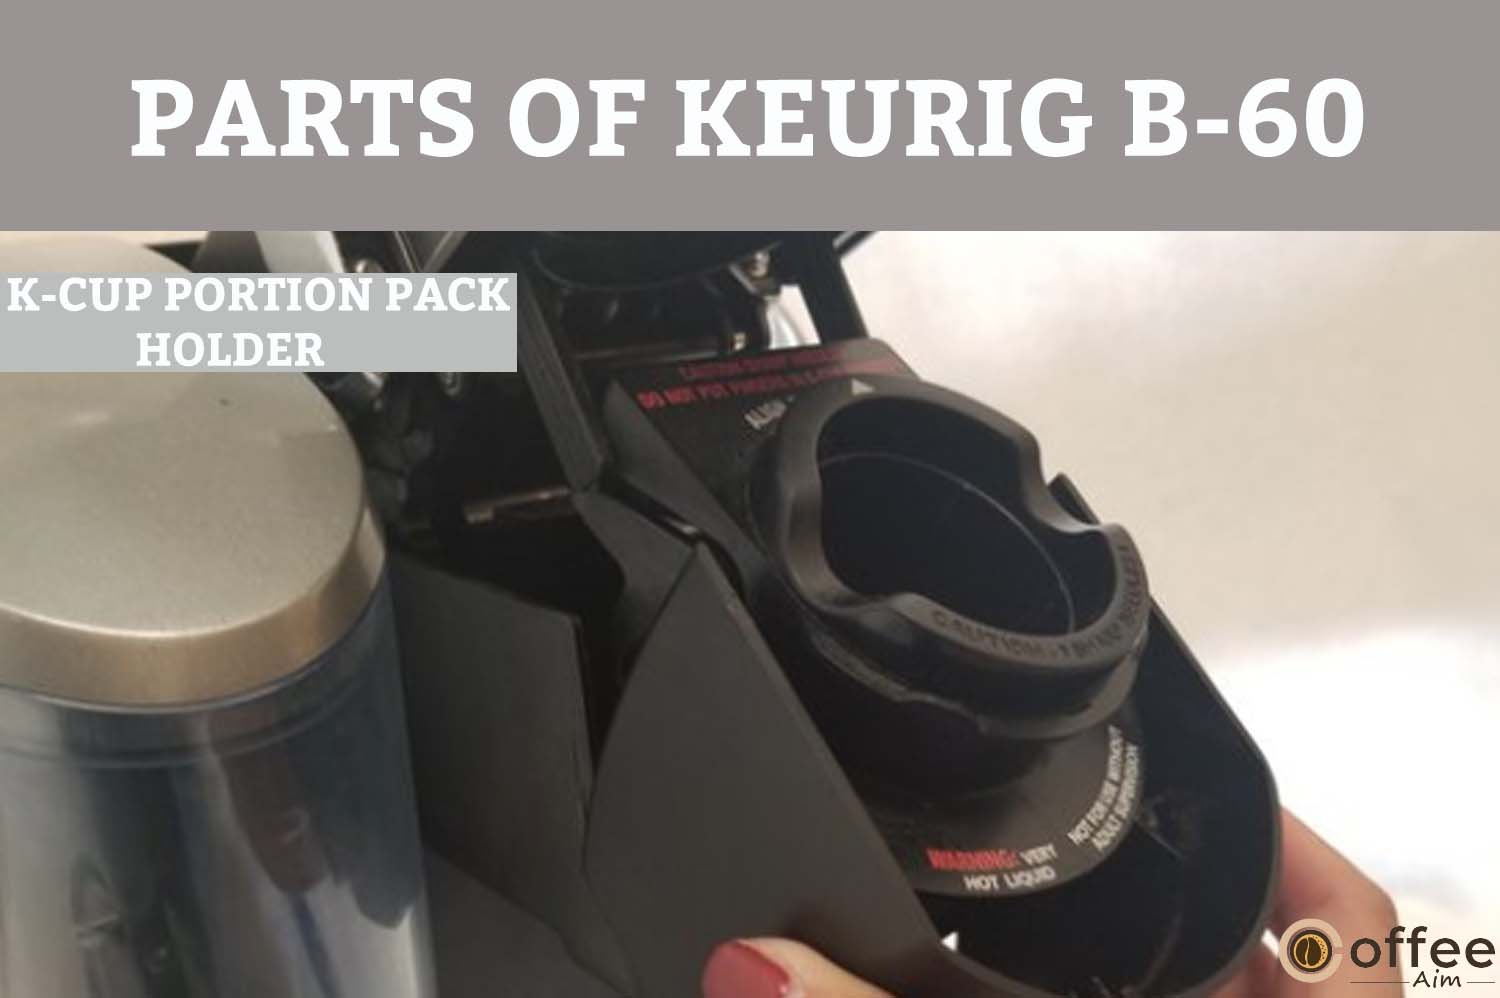 The K-Cup Portion Pack Holder is located on the upper side of the brewer, providing a space to insert the K-Cup pack into the K-Cup holder for brewing.